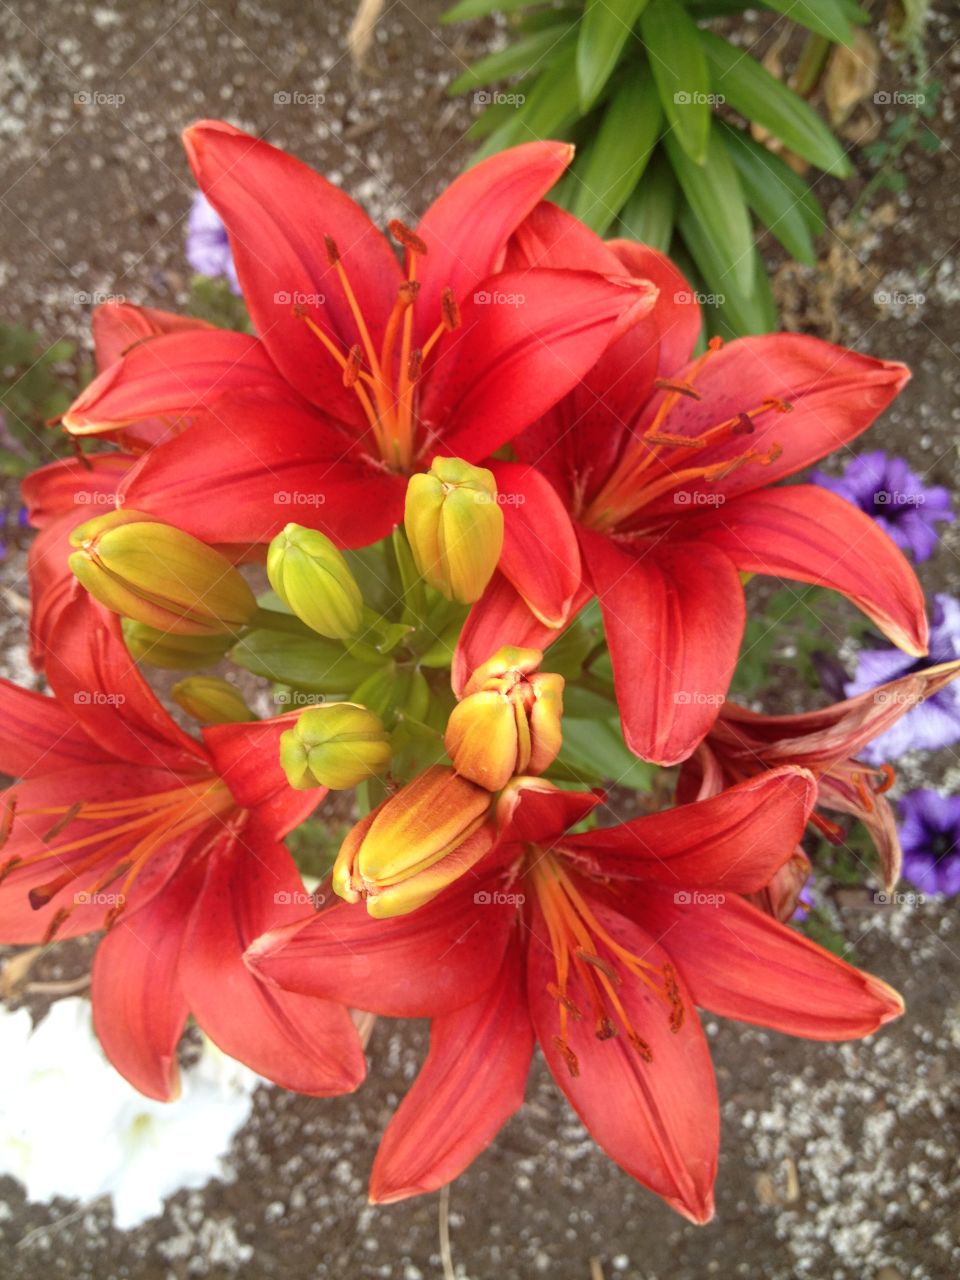 Red lily in bloom